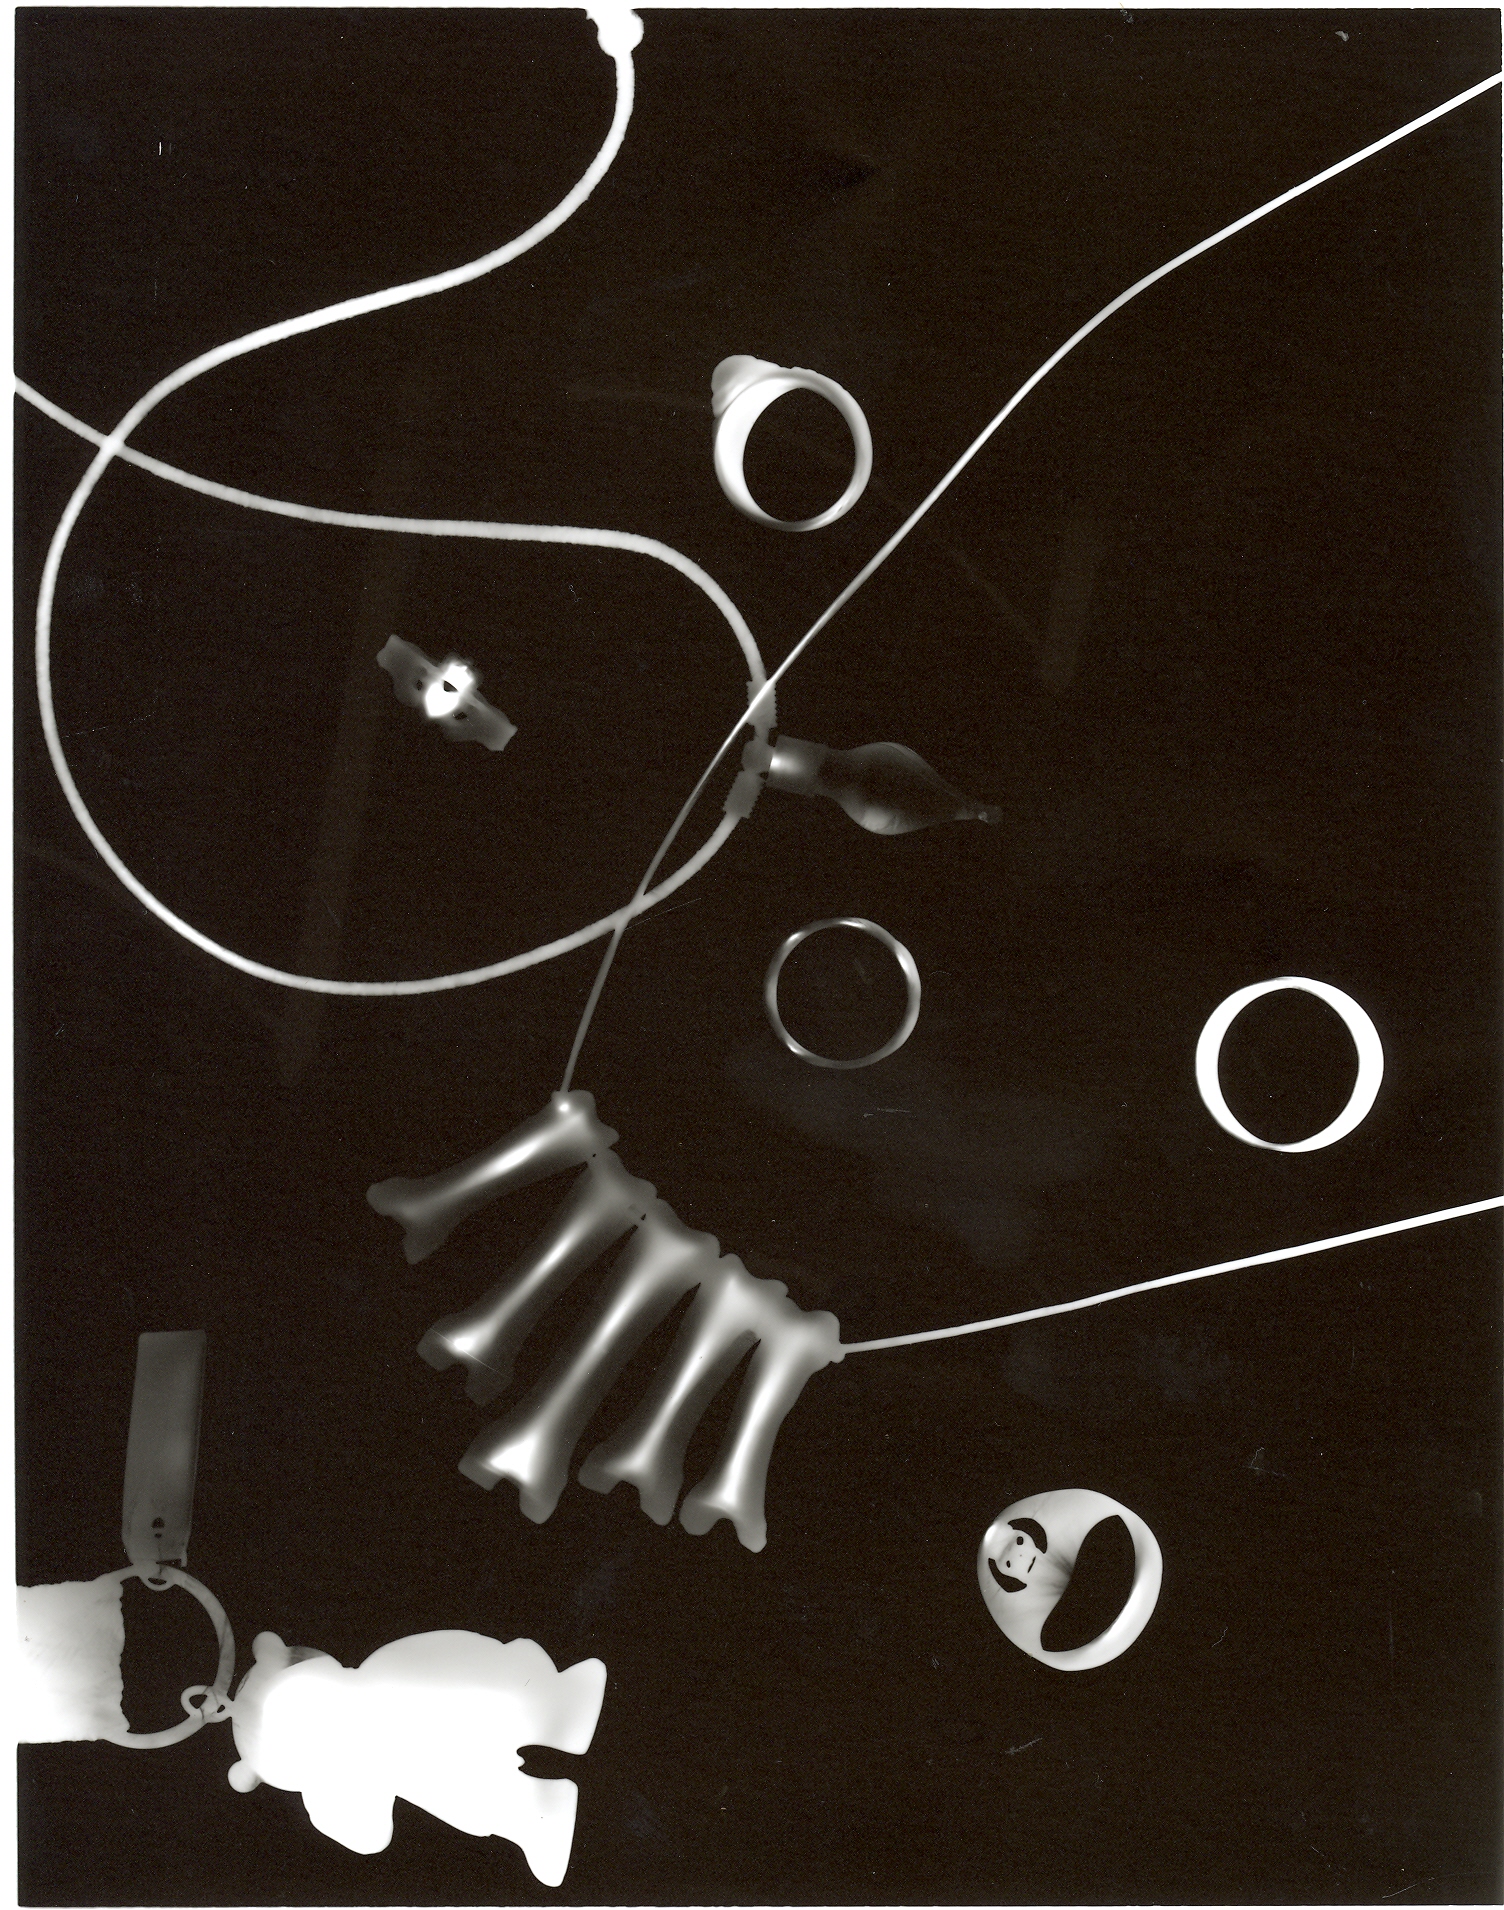 Photogram - Junk by Twisted_Rebel